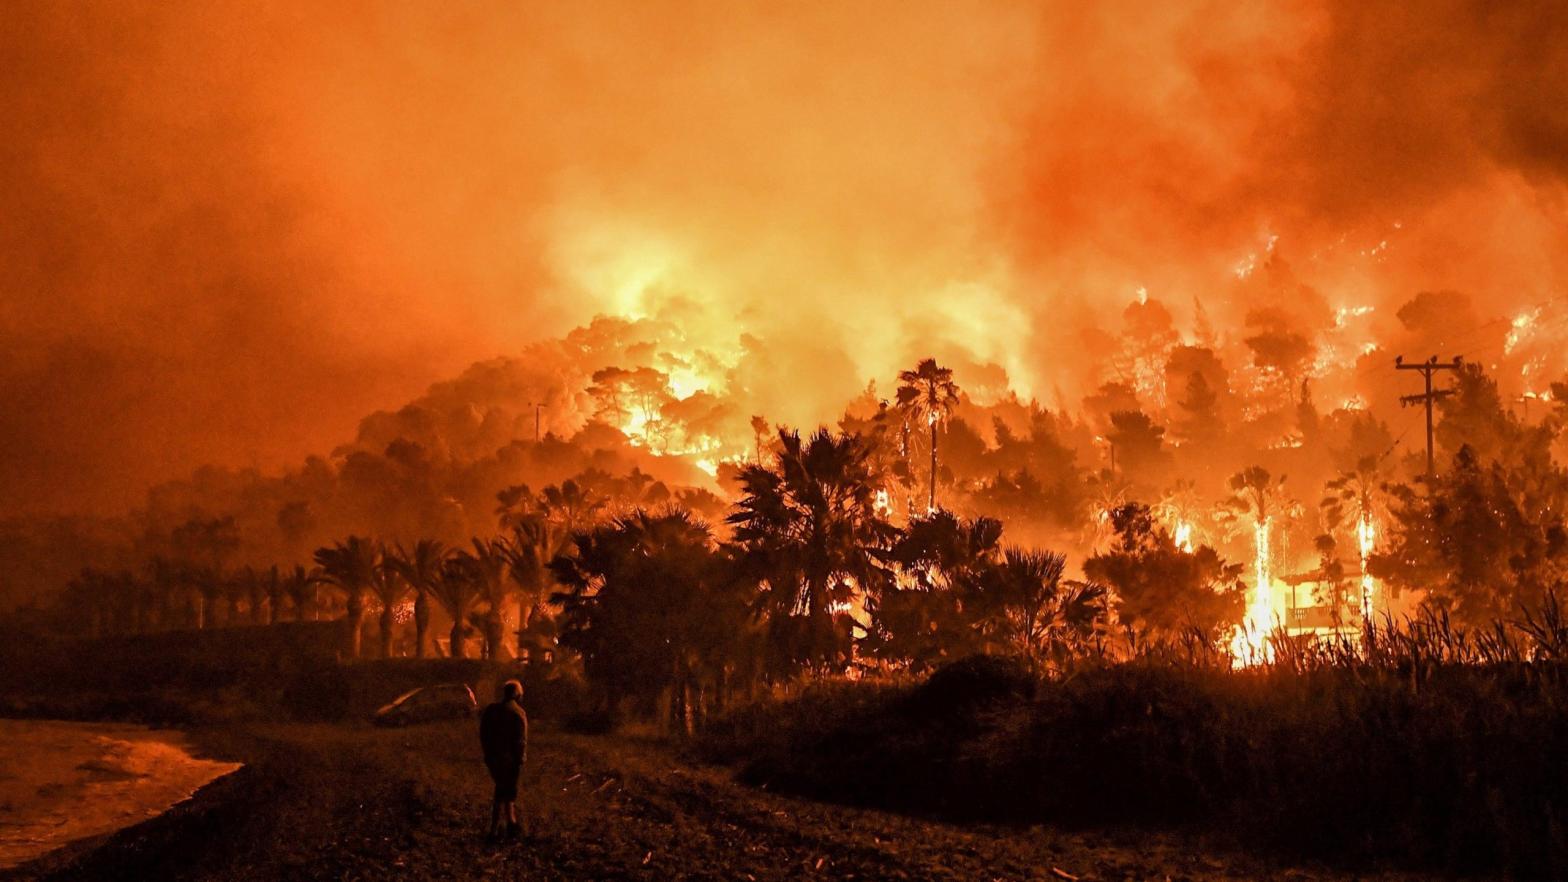 A man stands in front of a wild fire in Schinos, west of Athens, on May 19, 2021. (Photo: Valerie Gache/AFP, Getty Images)